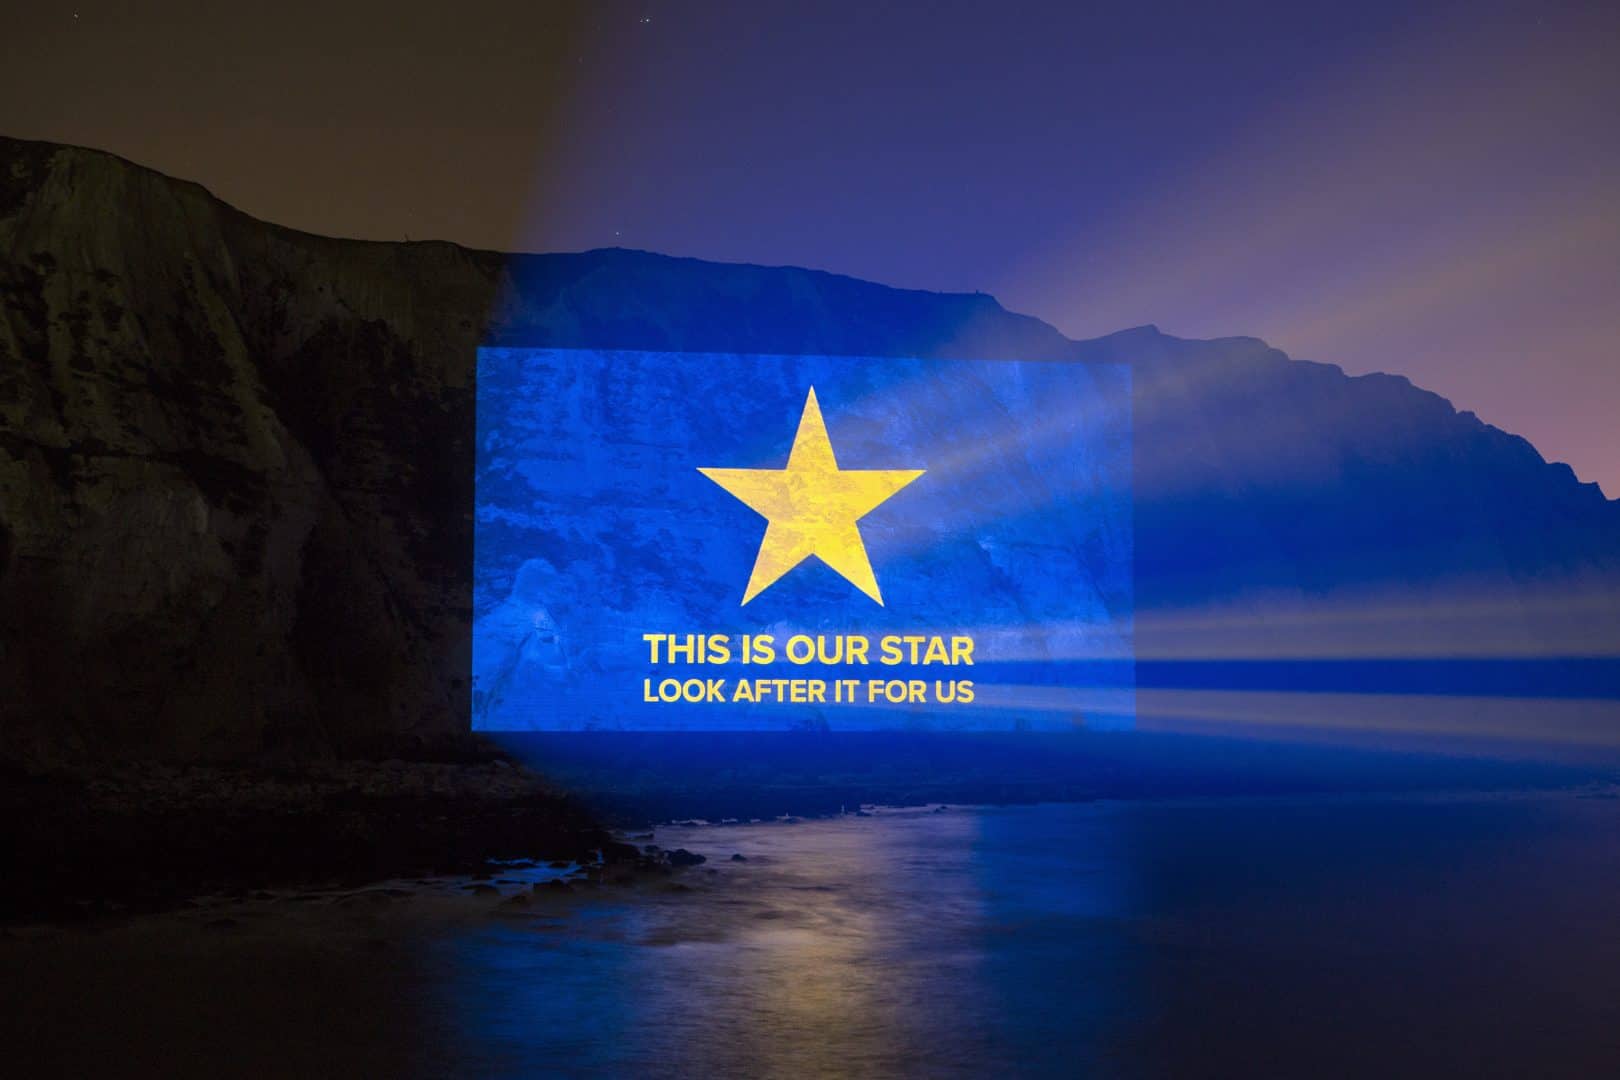 ‘This is our star. Look after it for us’: veterans project Brexit Day message to EU on Dover cliffs